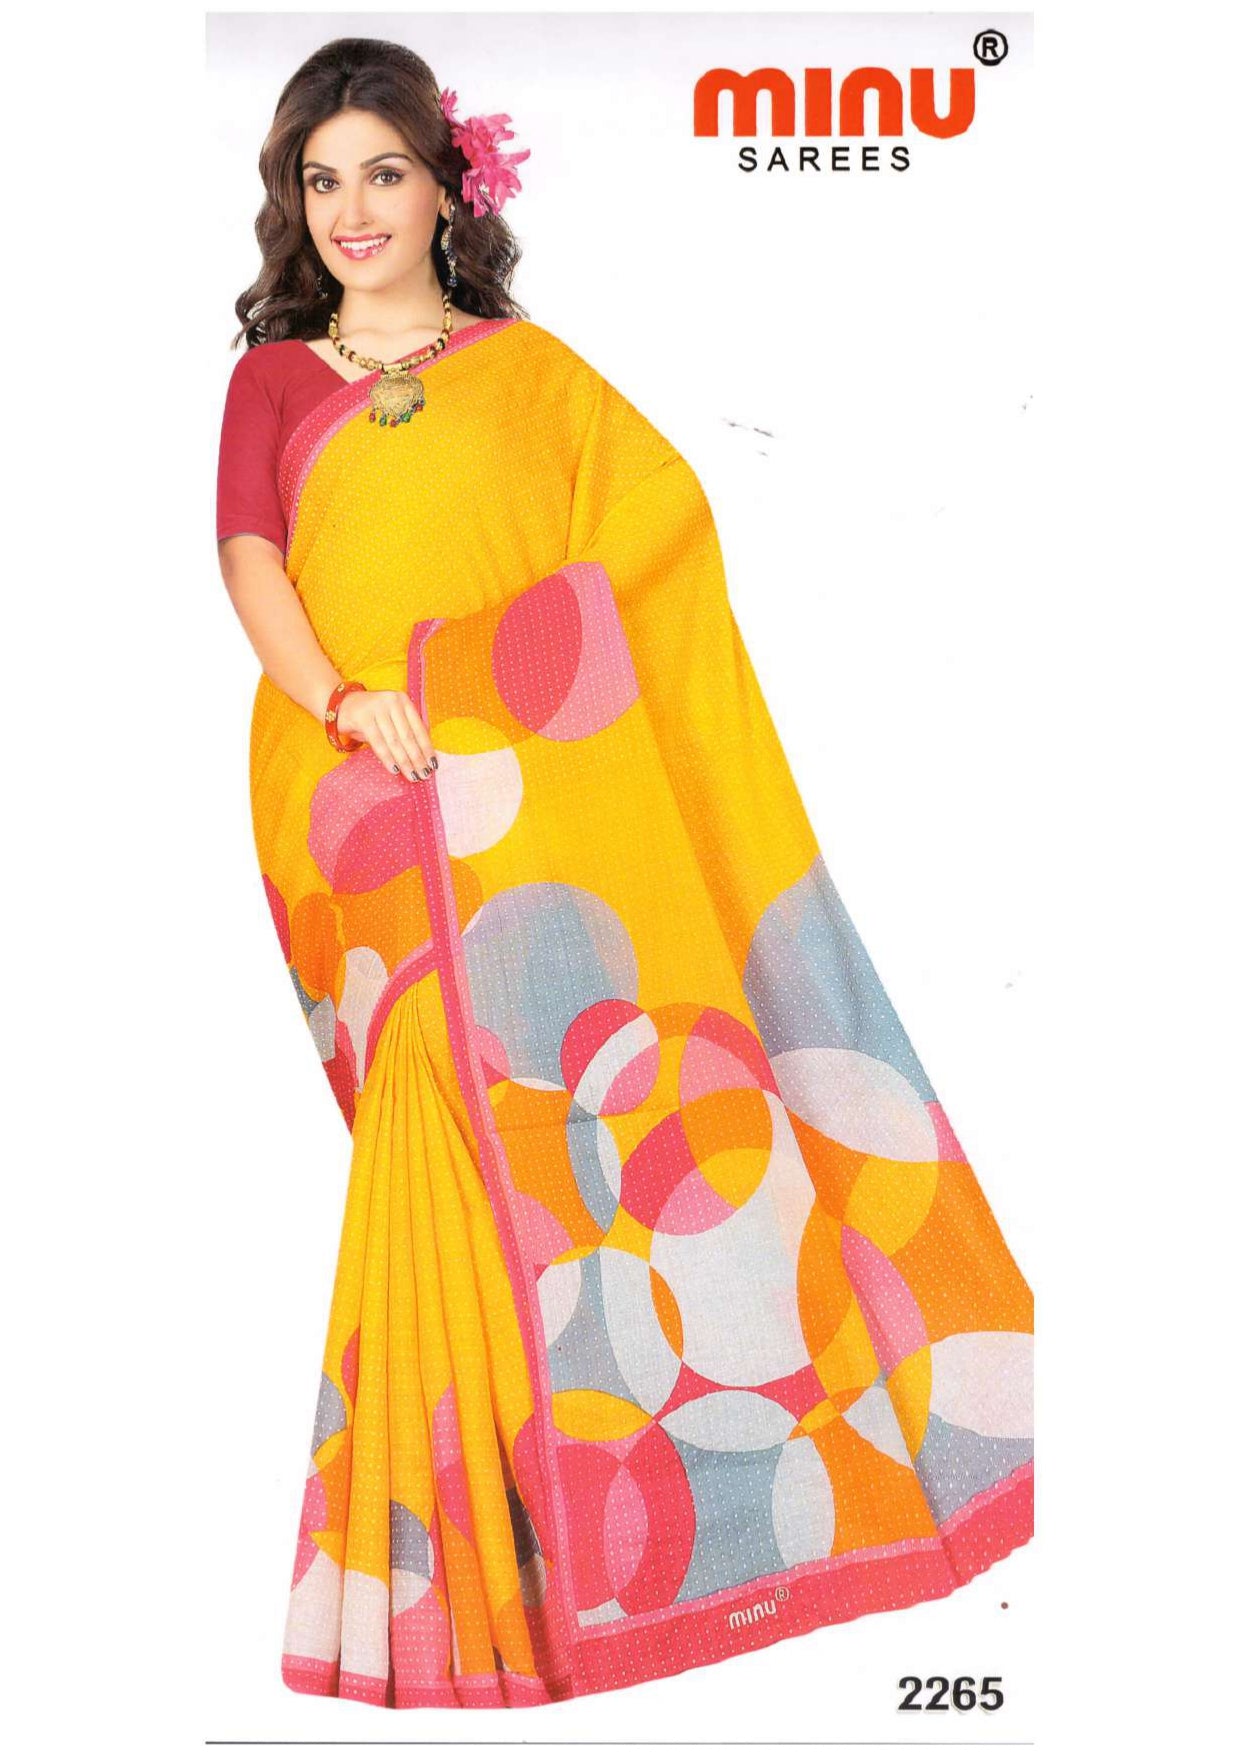 Woman wearing yellow printed saree for retailers image